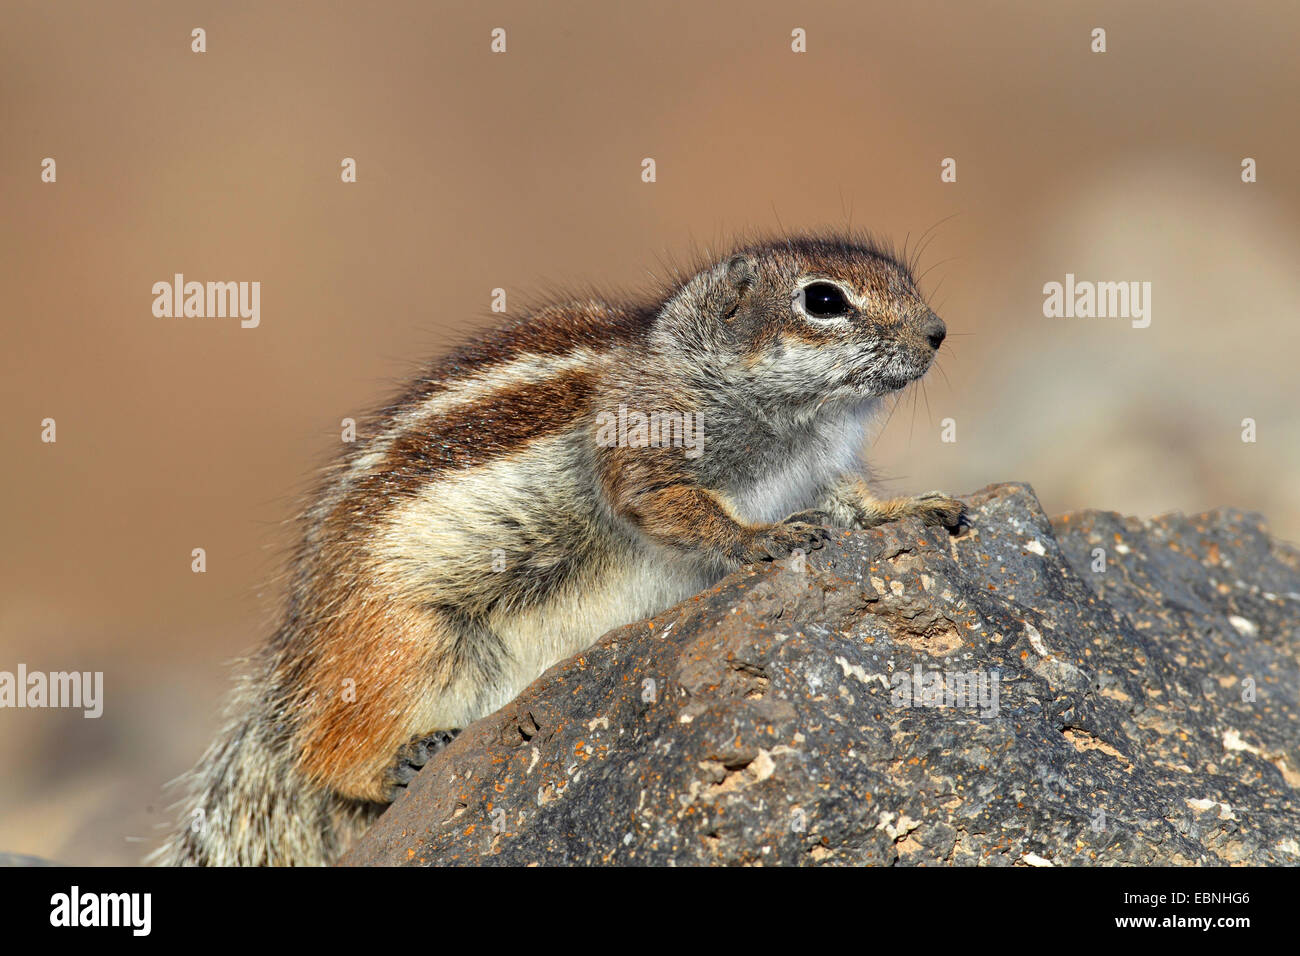 barbary ground squirrel, North African ground squirrel (Atlantoxerus getulus), sits on a stone, Canary Islands, Fuerteventura Stock Photo